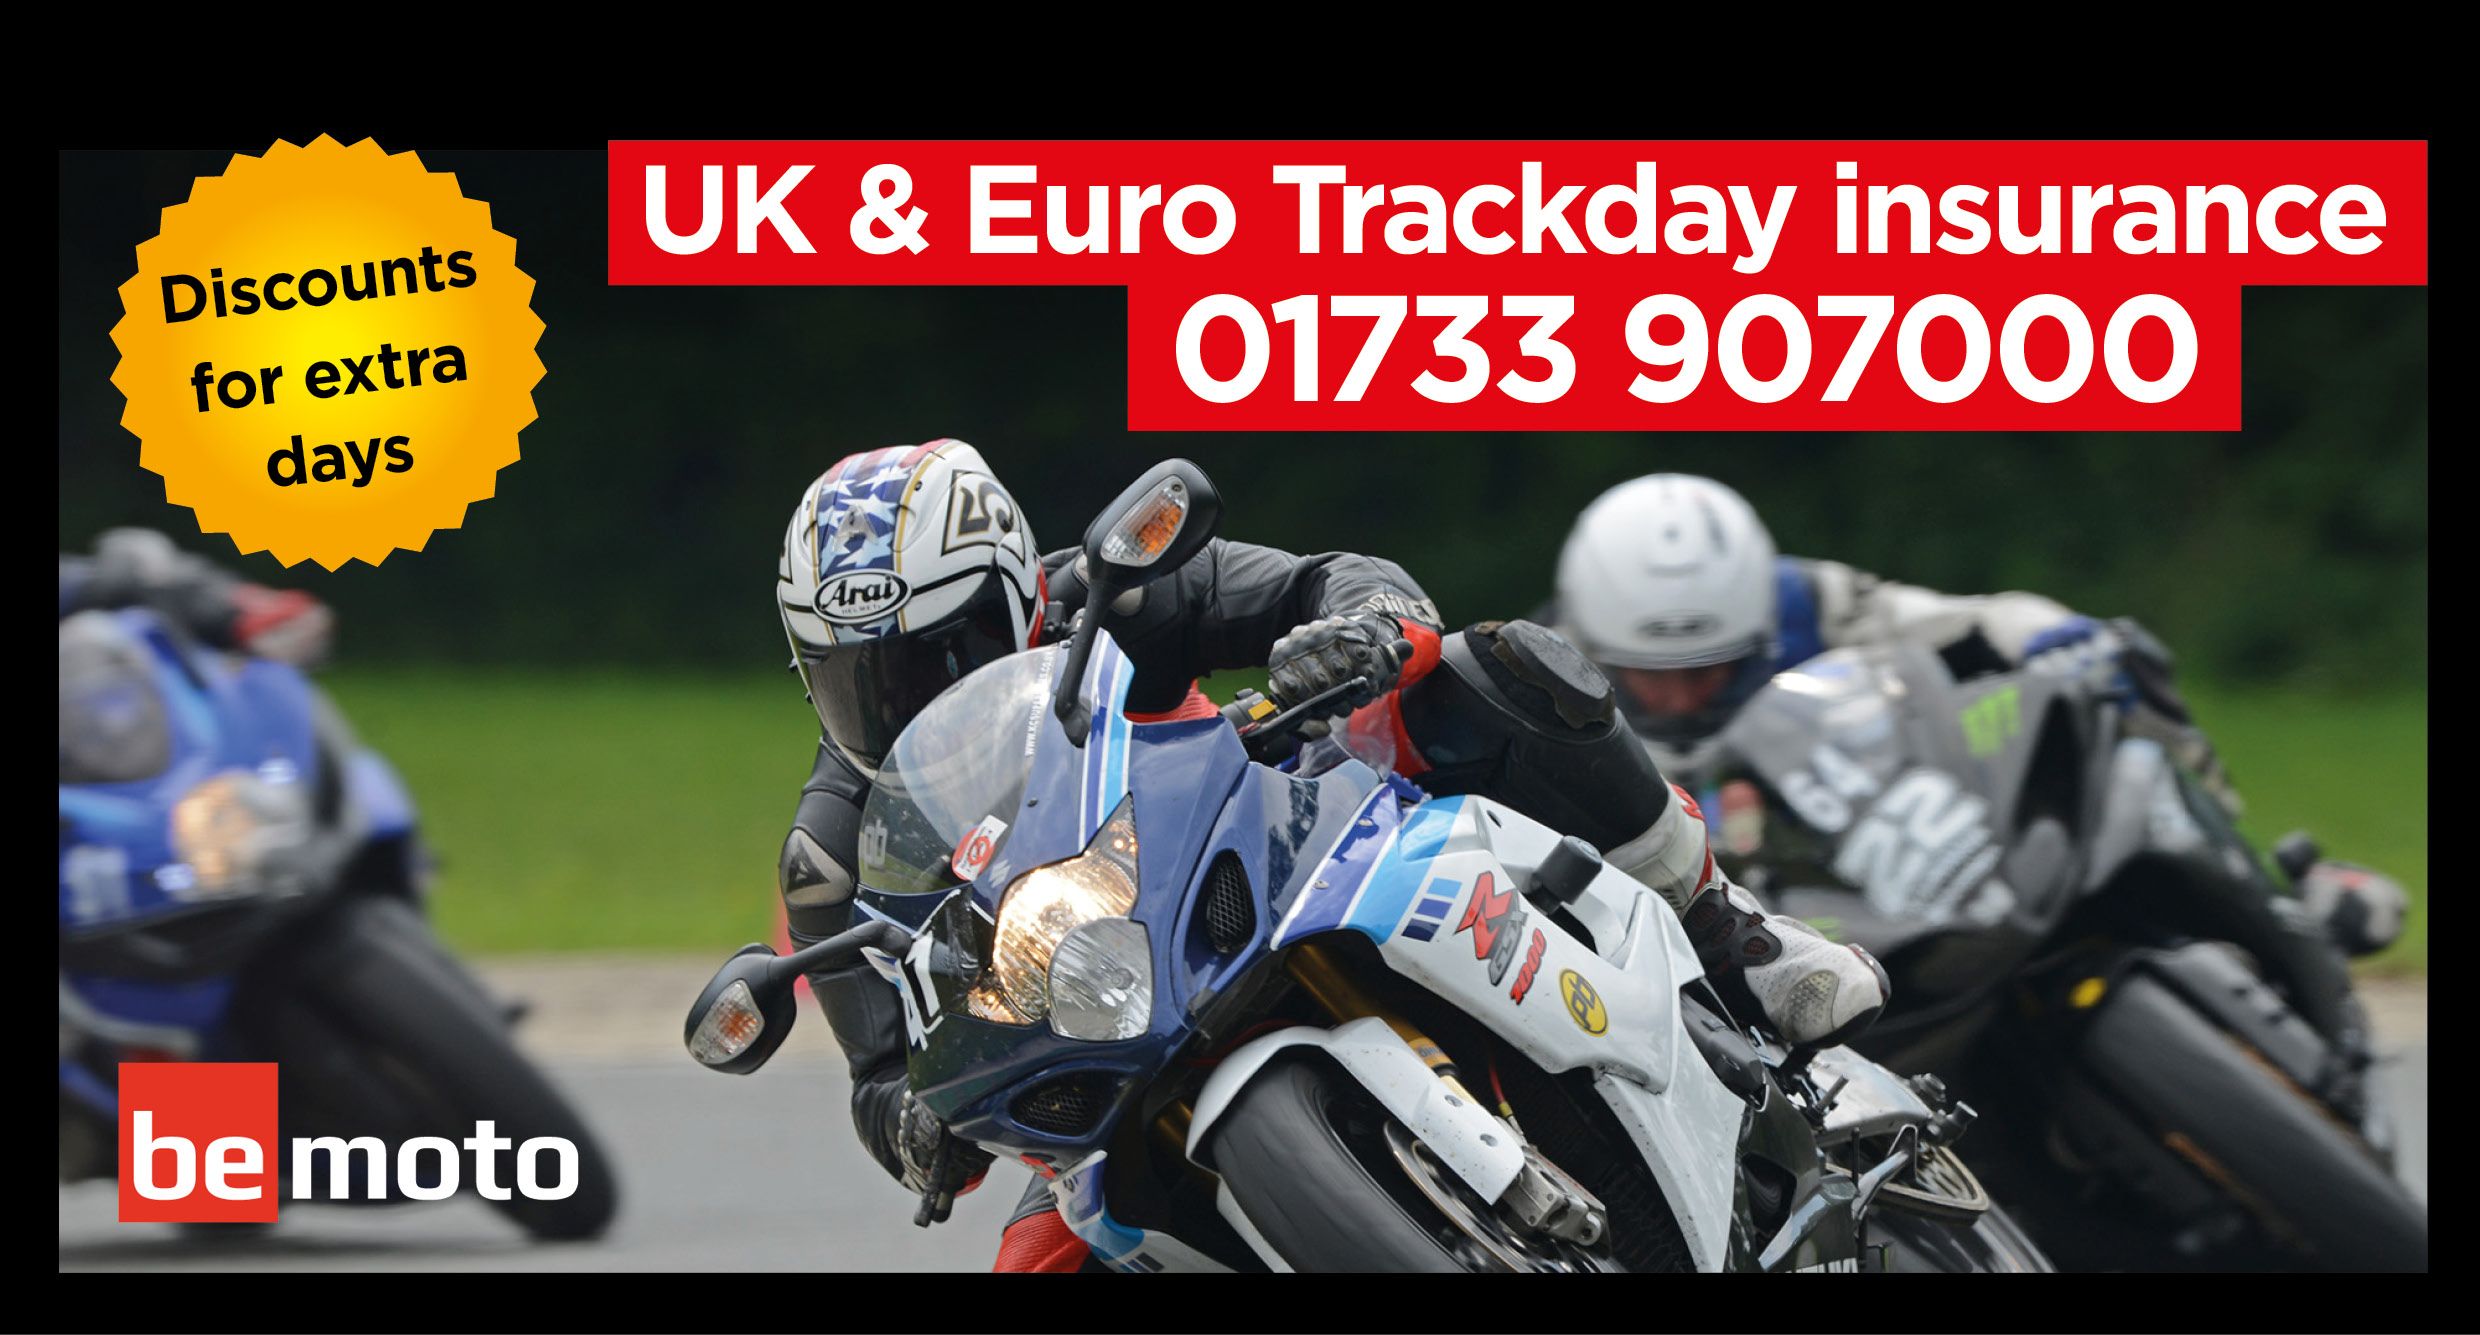 Motorcycle trackday insurance for UK and EU circuits